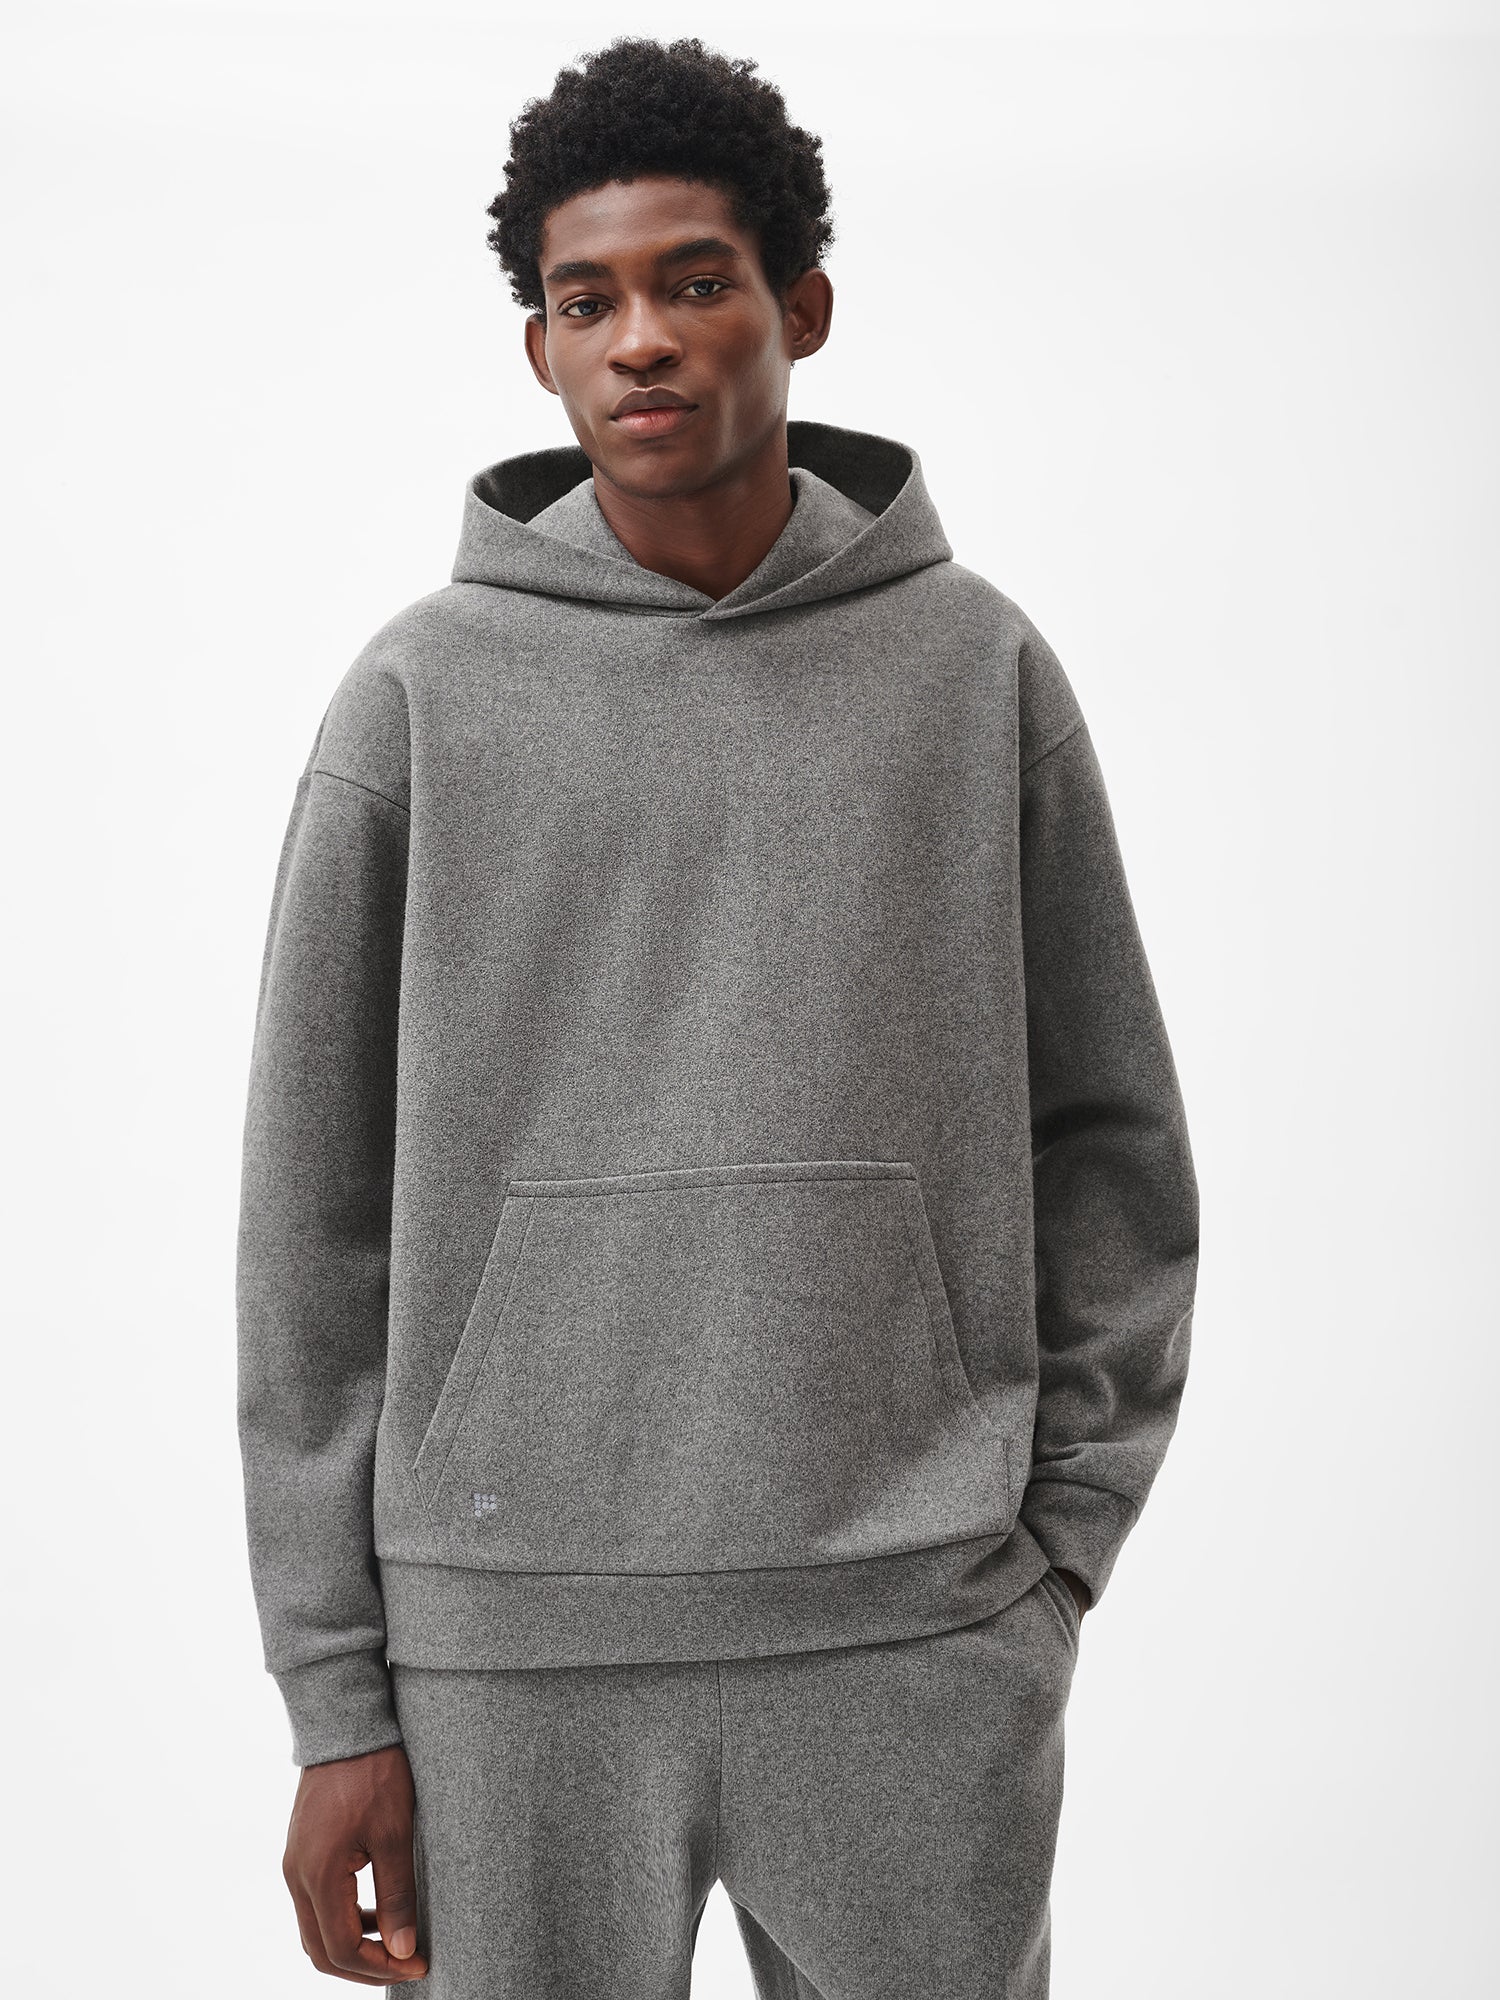 Wool-Jersey-Hoodie-With-Pocket-Volcanic-Grey-male-1